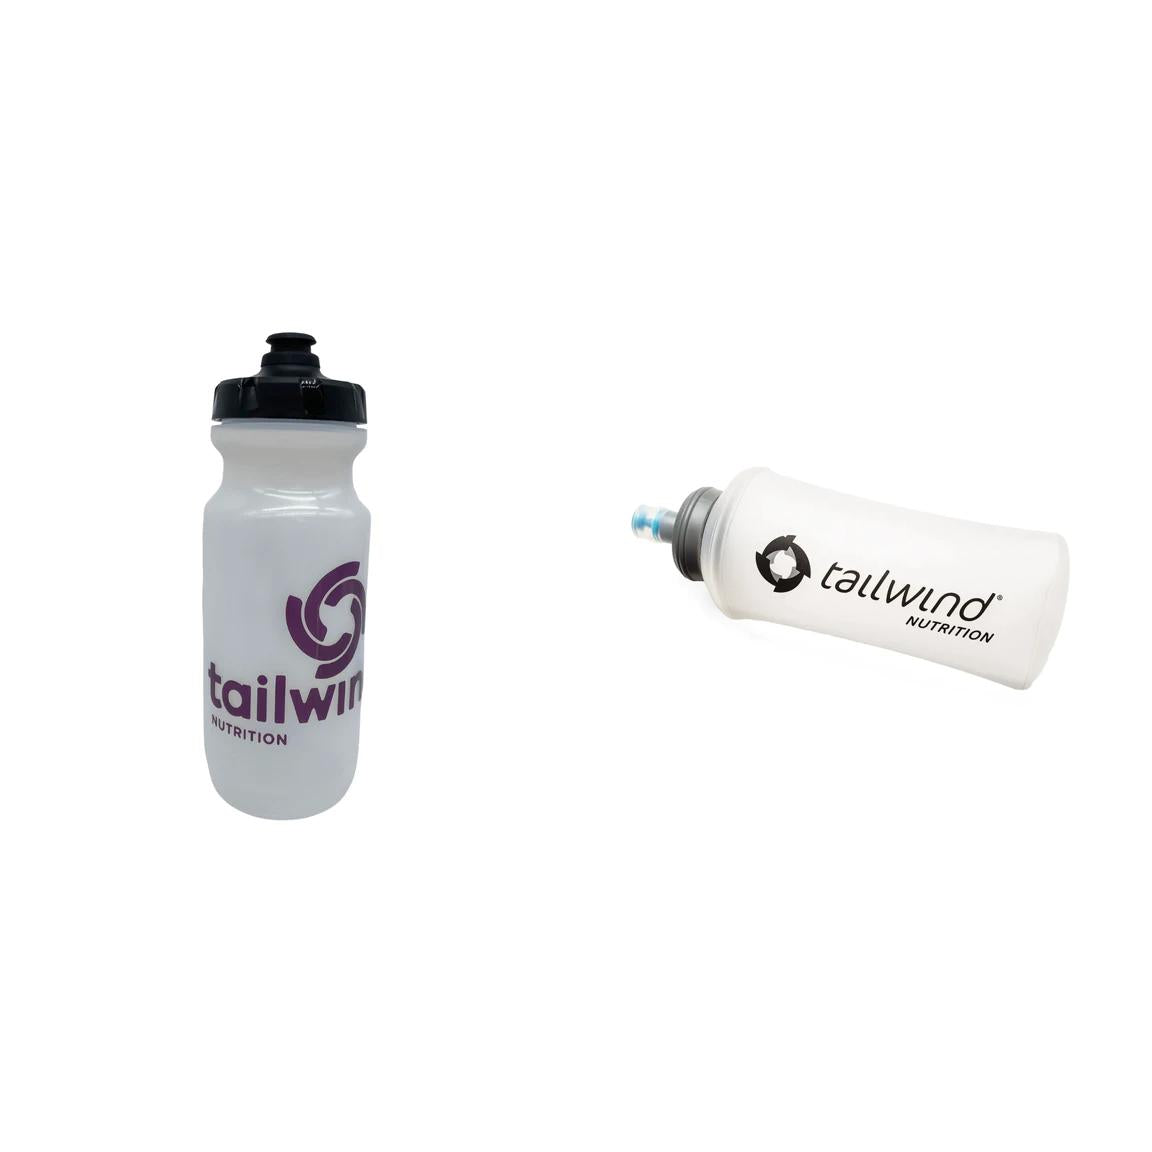 Tailwind Water Bottle and Soft Flask Bundle